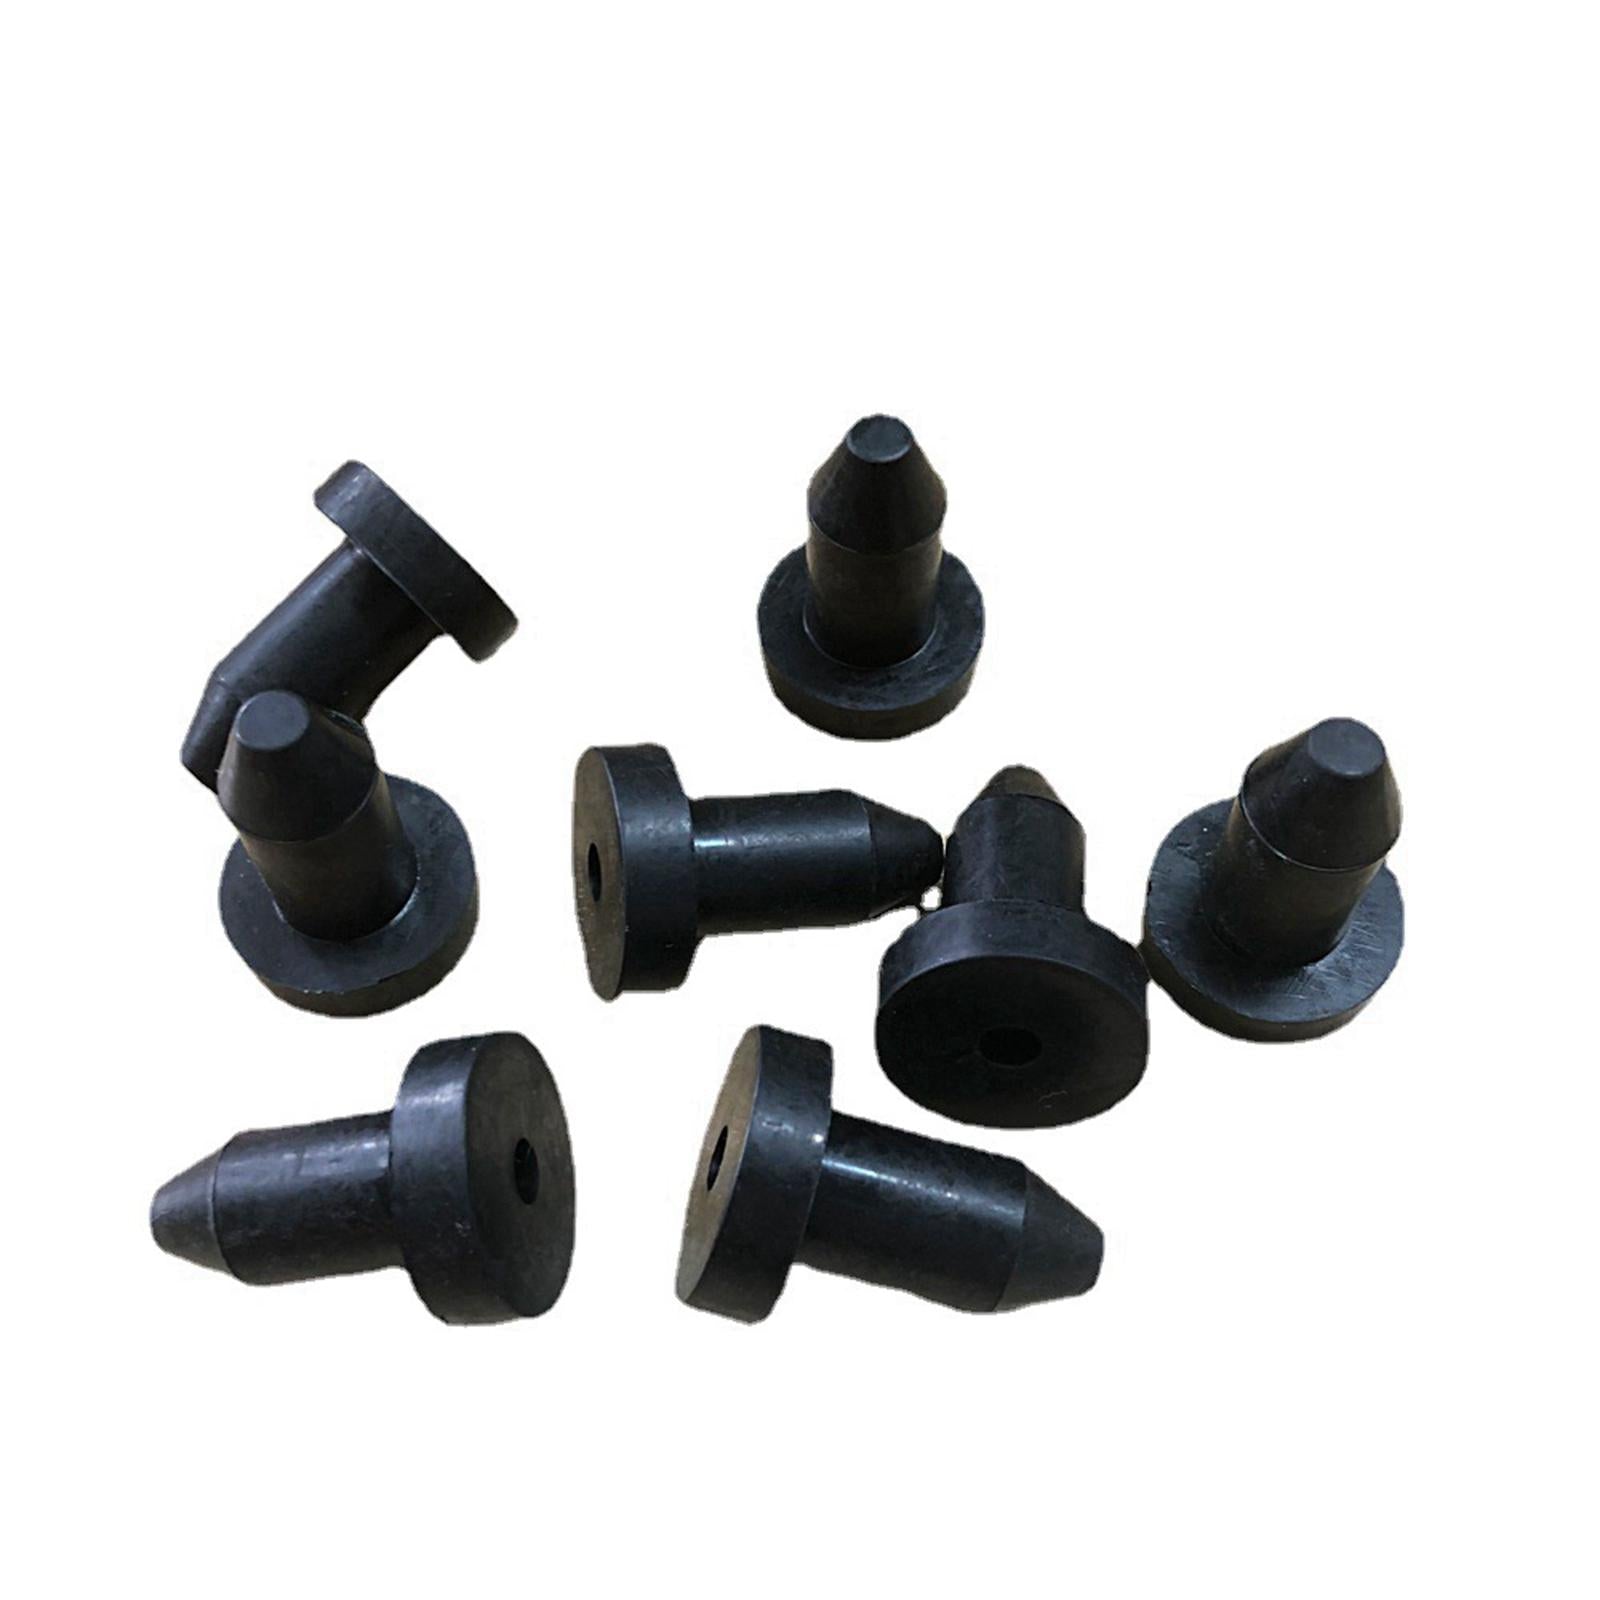 10pcs Kayak Drain Plugs Stoppers for Excurion 10 Pedal Boats Replacement